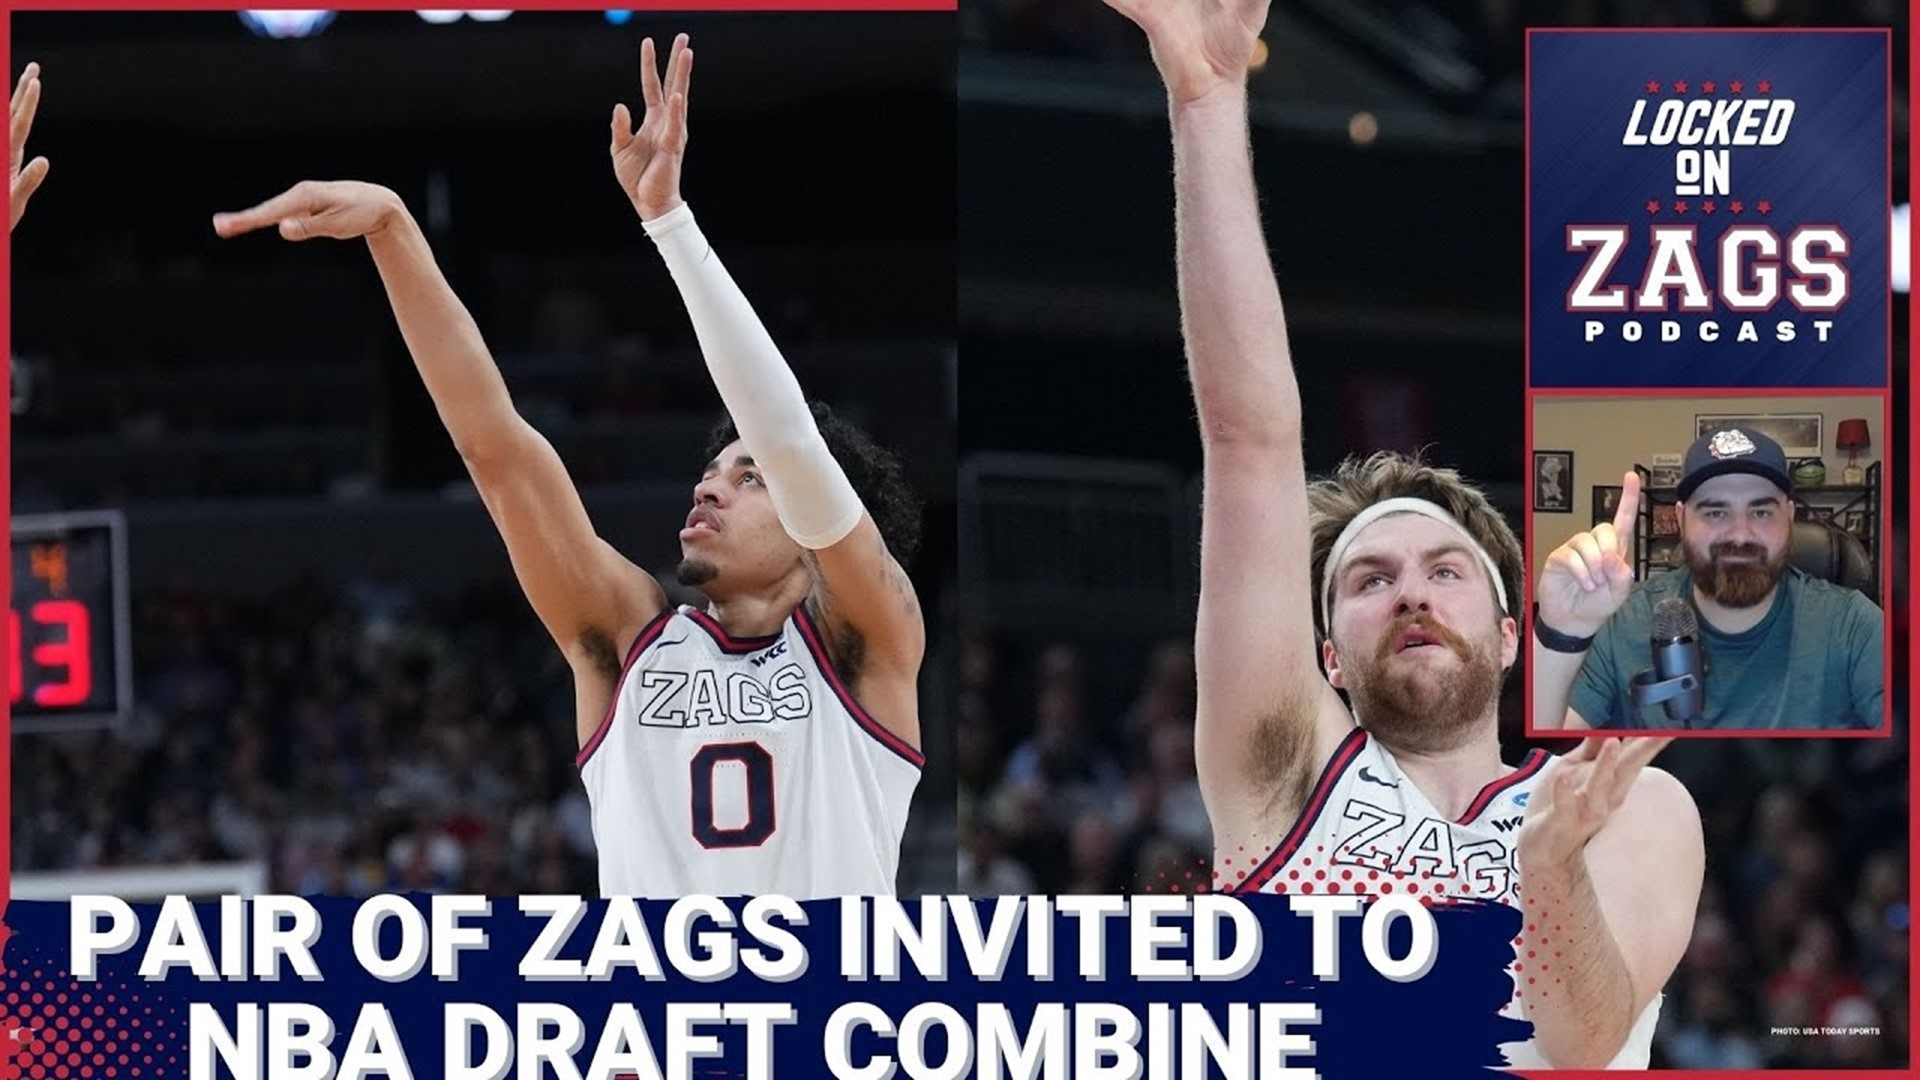 The NBA draft combine player list was revealed on Tuesday and a pair of Gonzaga Bulldogs, Drew Timme and Julian Strawther, were invited.